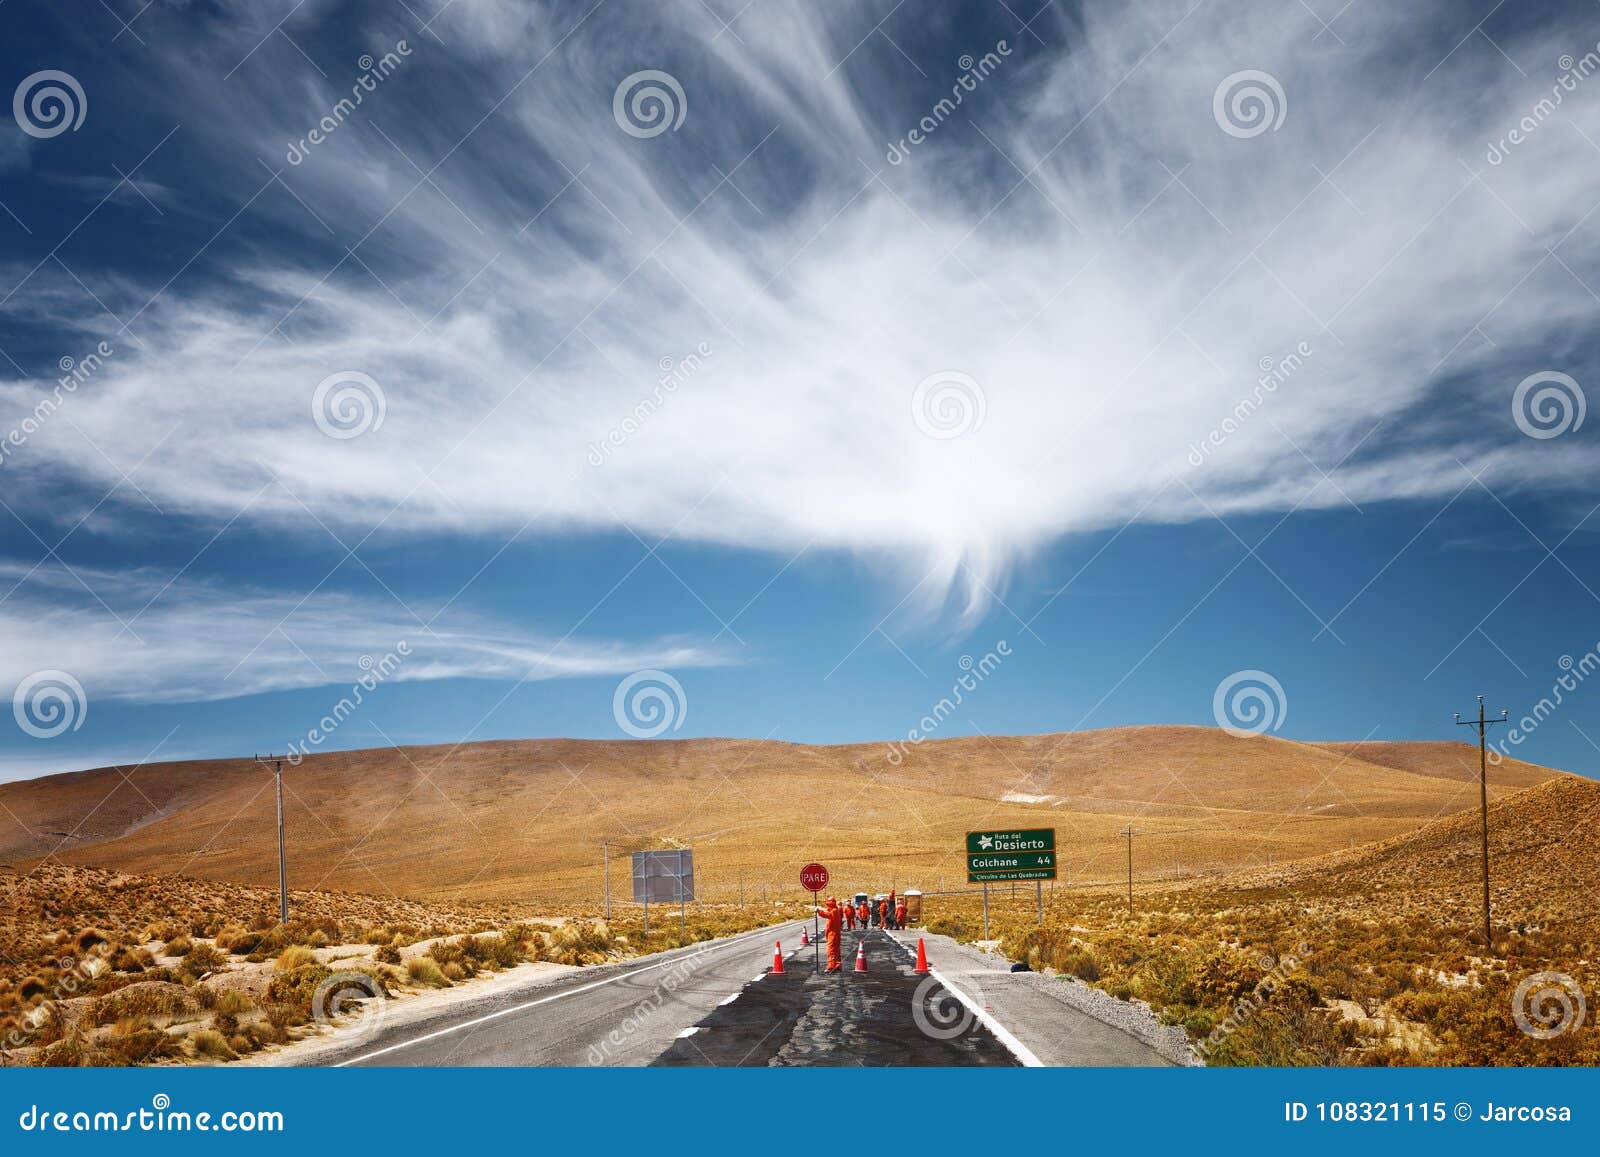 works on the road before arriving at the valley of happiness near cariquima and colchane in the tarapaca region, chile